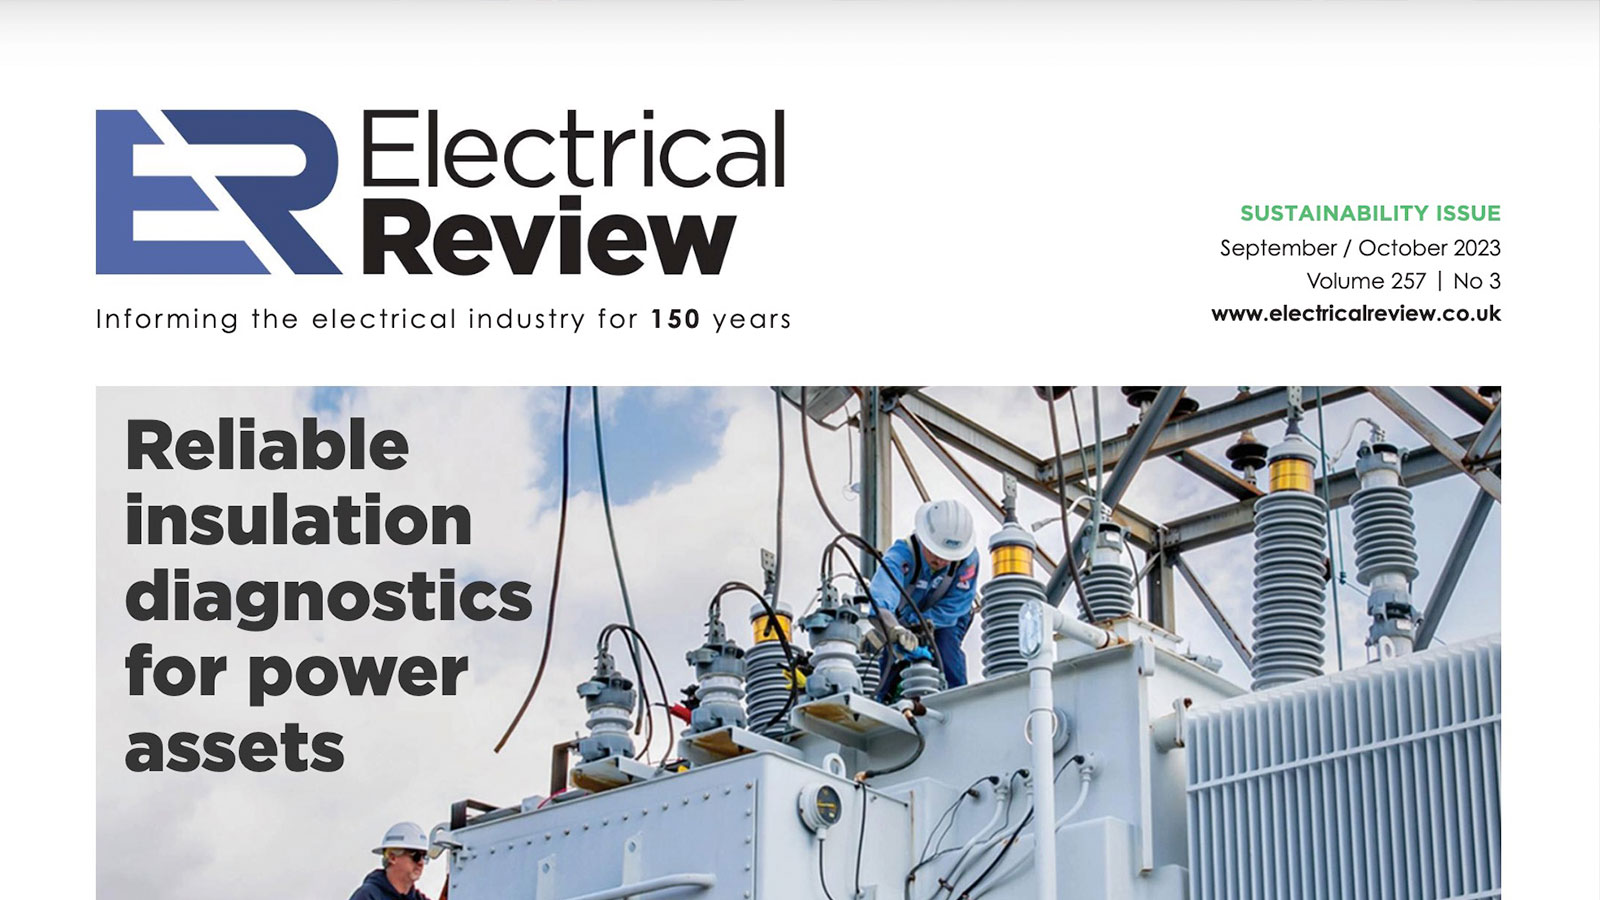 The 2023 Electrical Review Sustainability Issue is out now